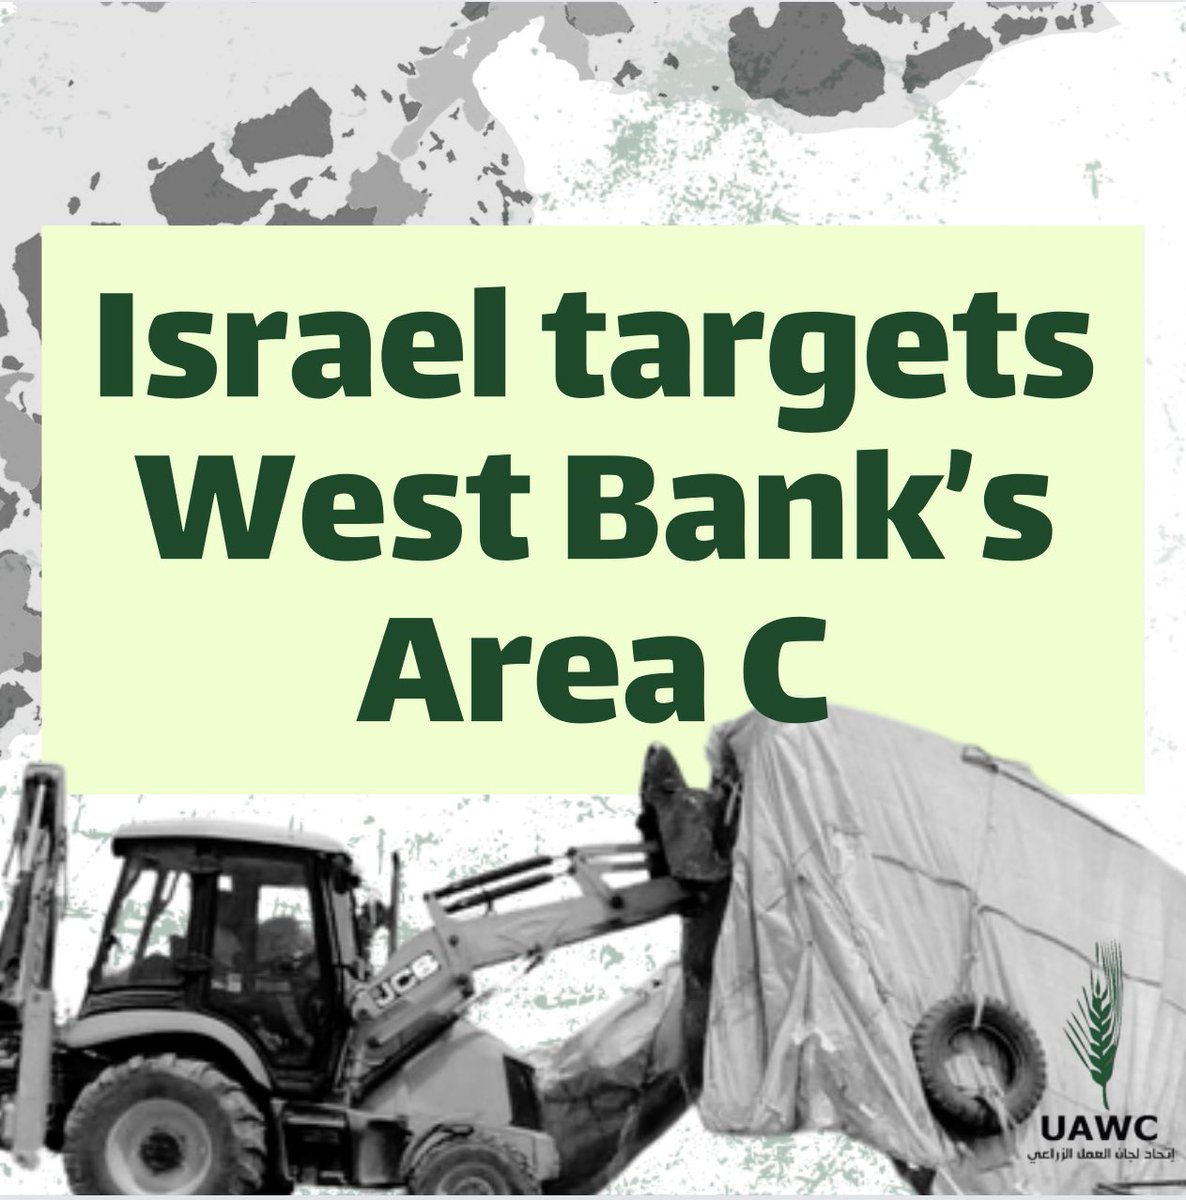 “Israeli settlers and forces are exploiting the global focus on Gaza to escalate their organized attacks on Palestinian communities in Area C of the West Bank.” Read Full Update on Area C: uawc-pal.org/news.php?n=361…